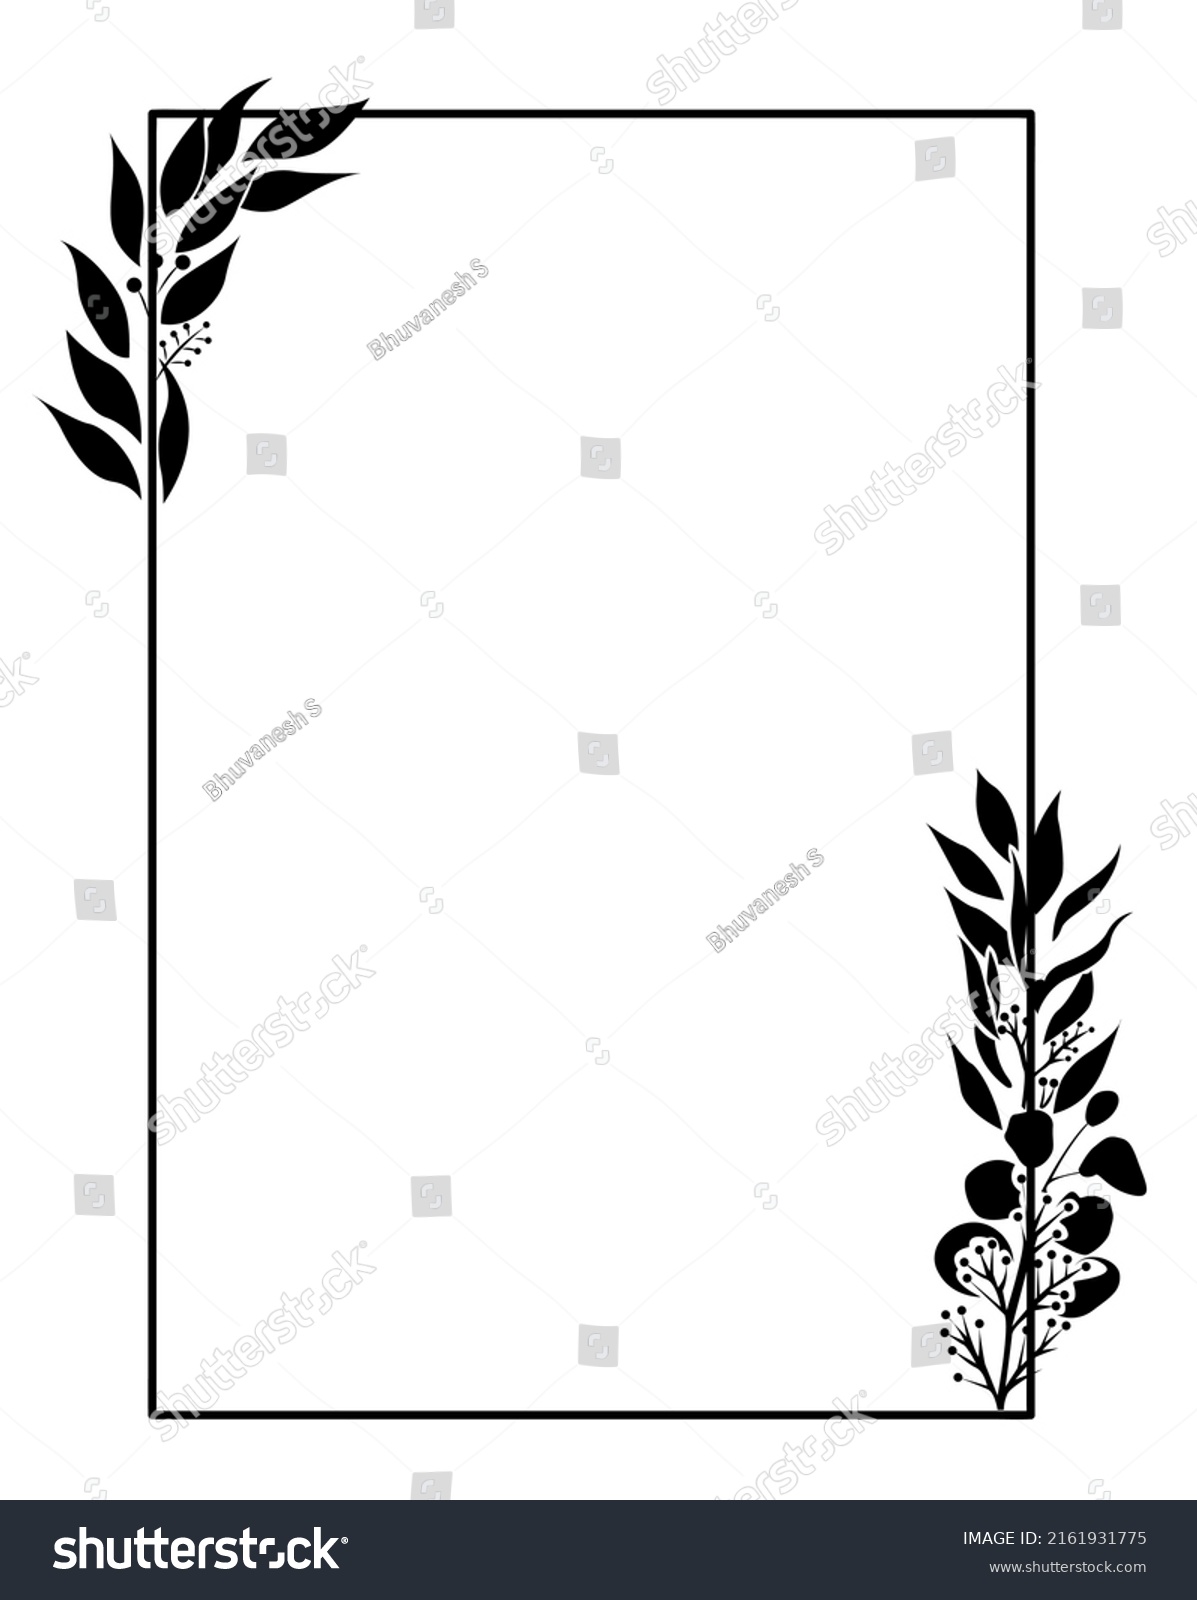 Floral Rectangular Frame Border Design Isolated Stock Vector Royalty Free 2161931775 4314